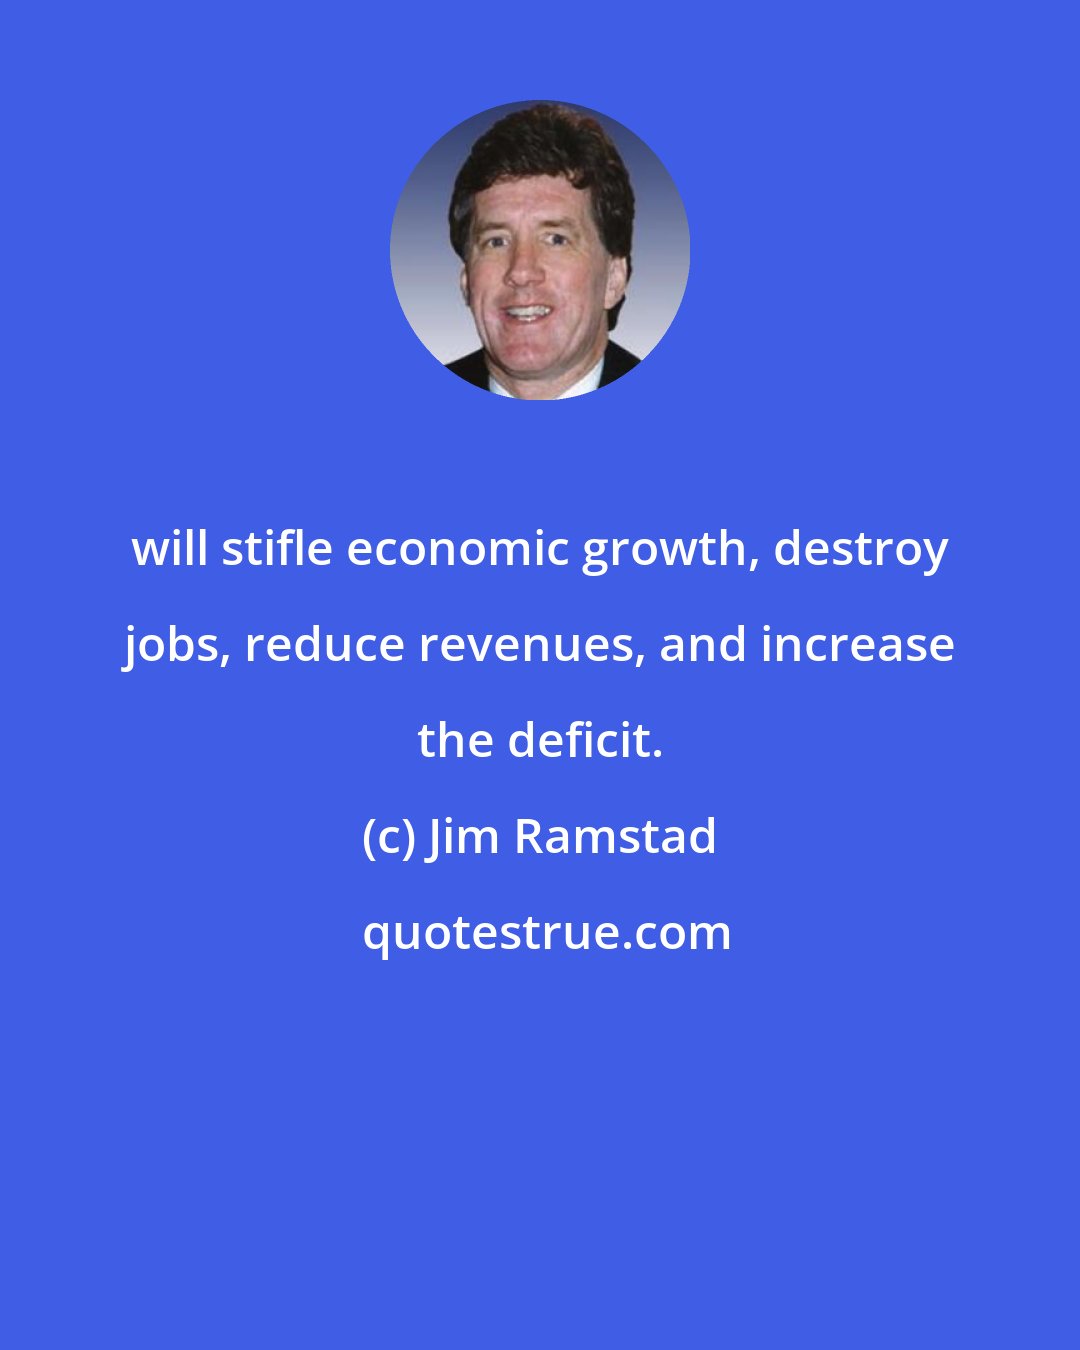 Jim Ramstad: will stifle economic growth, destroy jobs, reduce revenues, and increase the deficit.